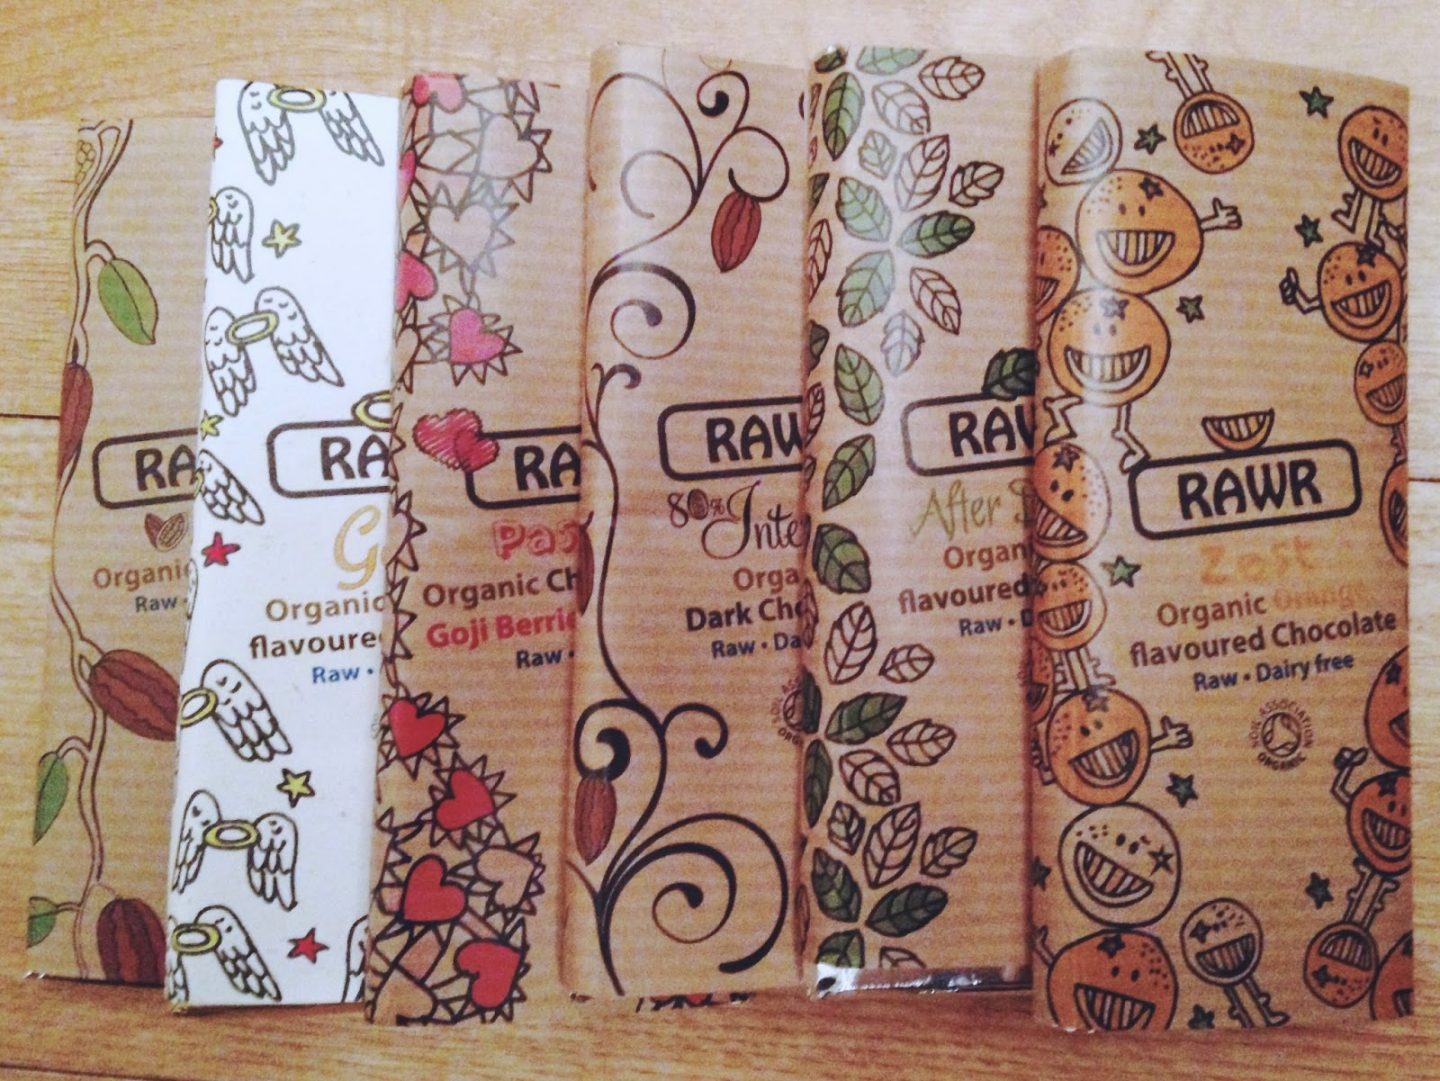 Review of Rawr Chocolate | Curiously Conscious